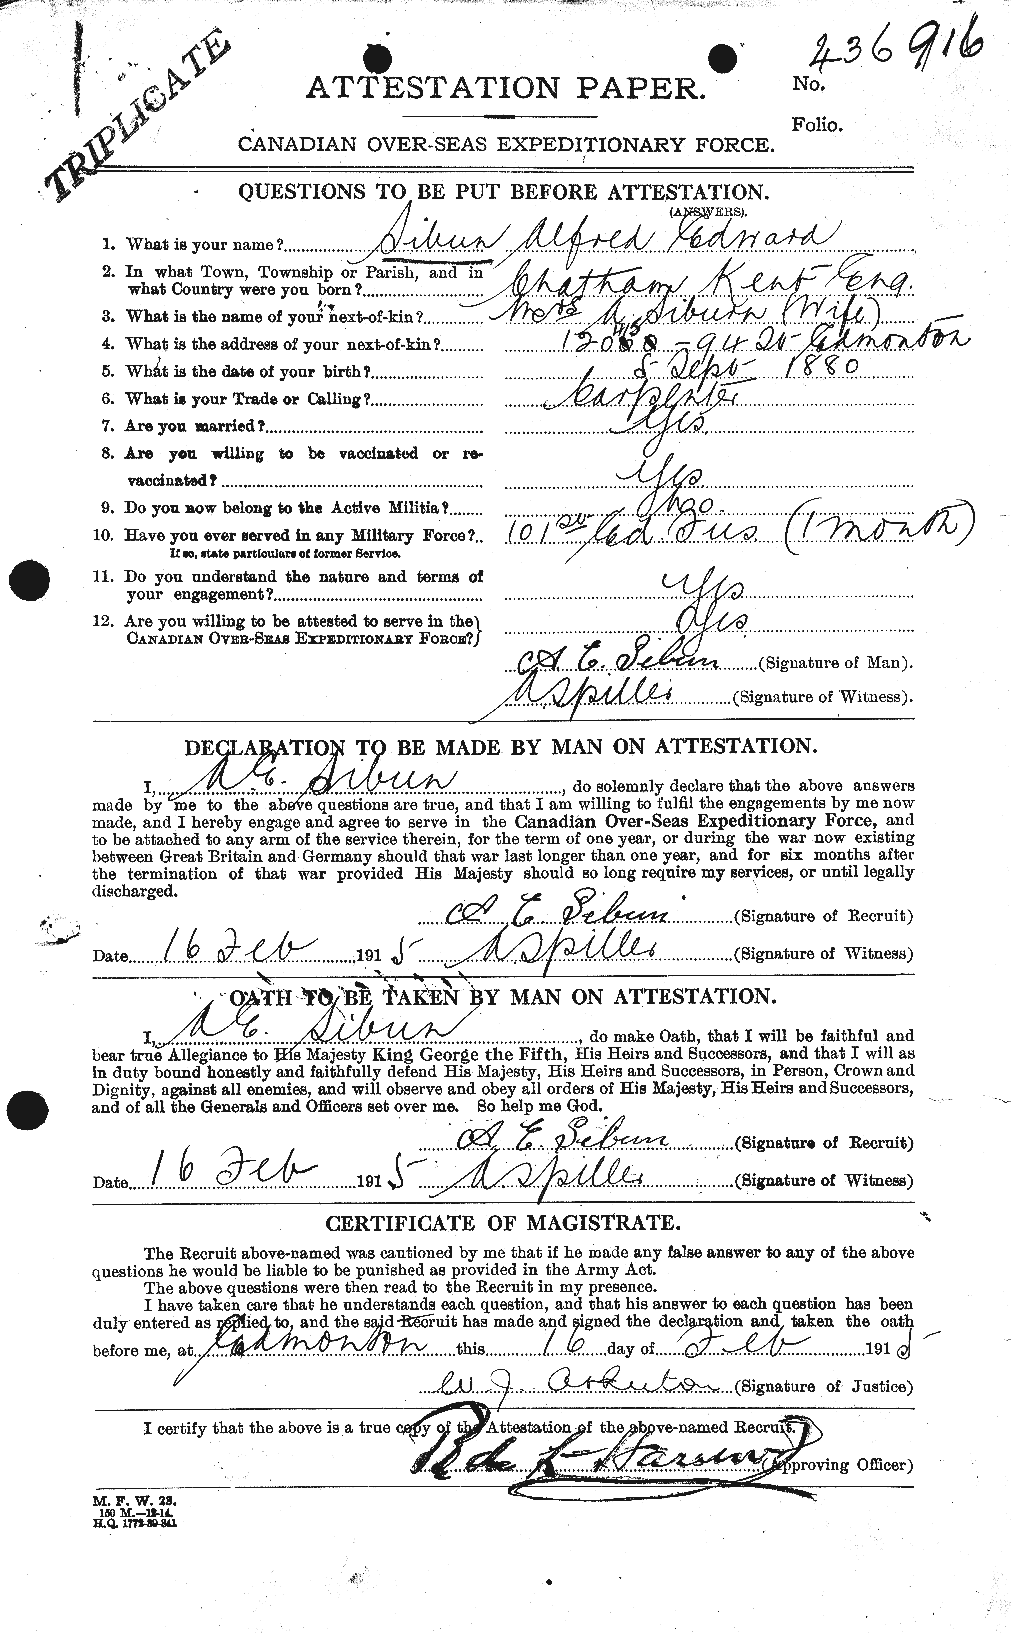 Personnel Records of the First World War - CEF 096402a